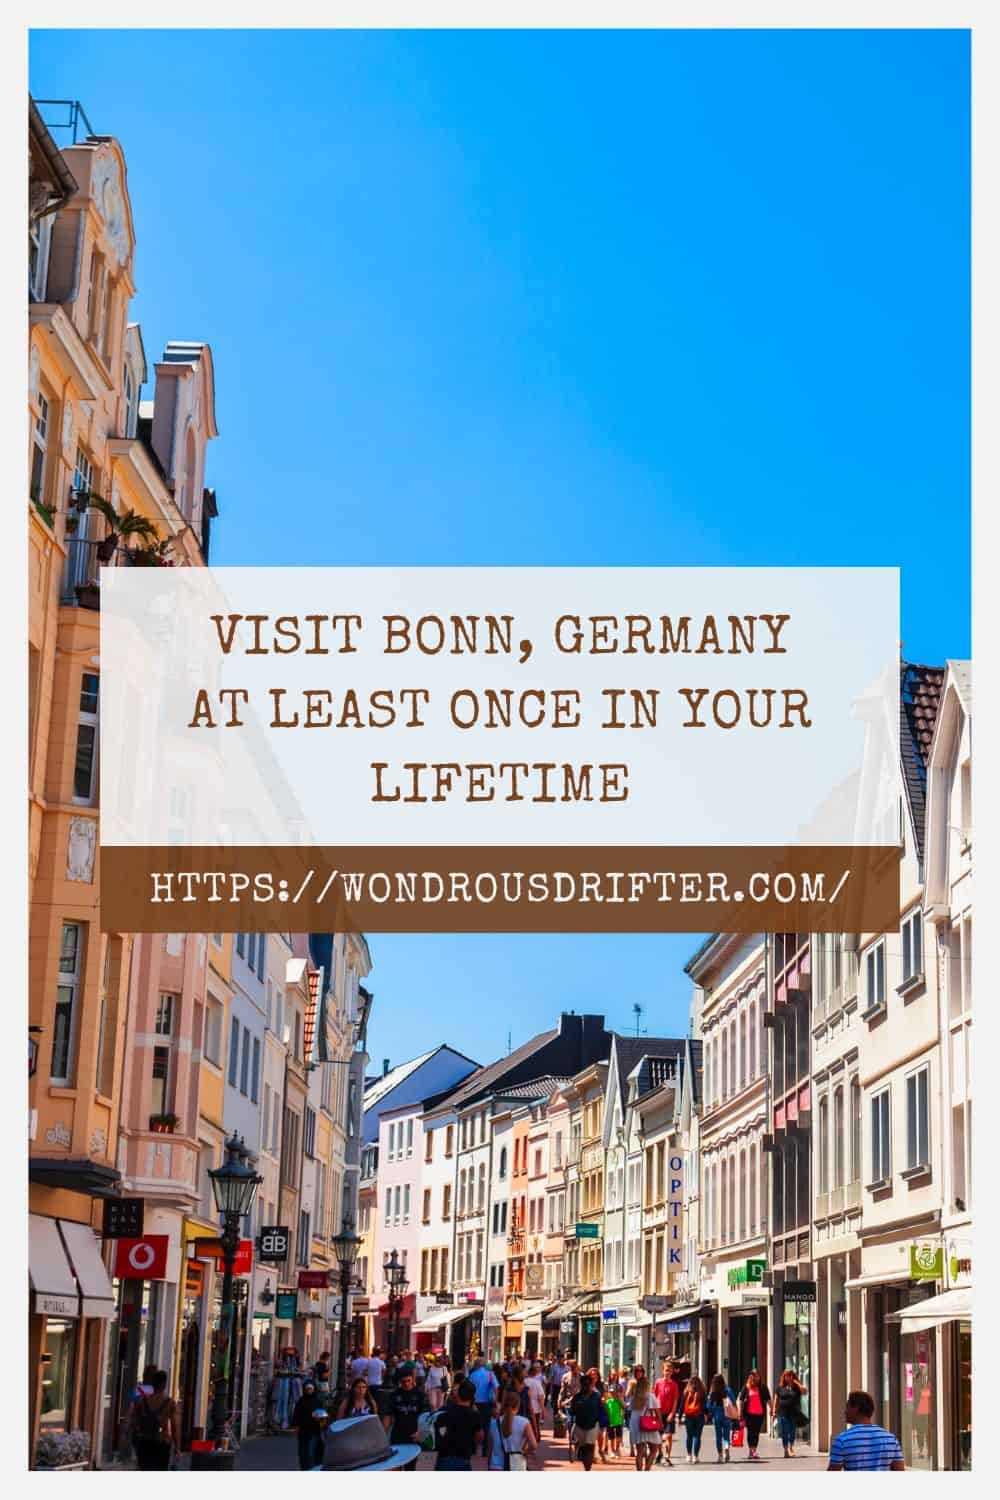 Visit Bonn Germany at least once in your lifetime